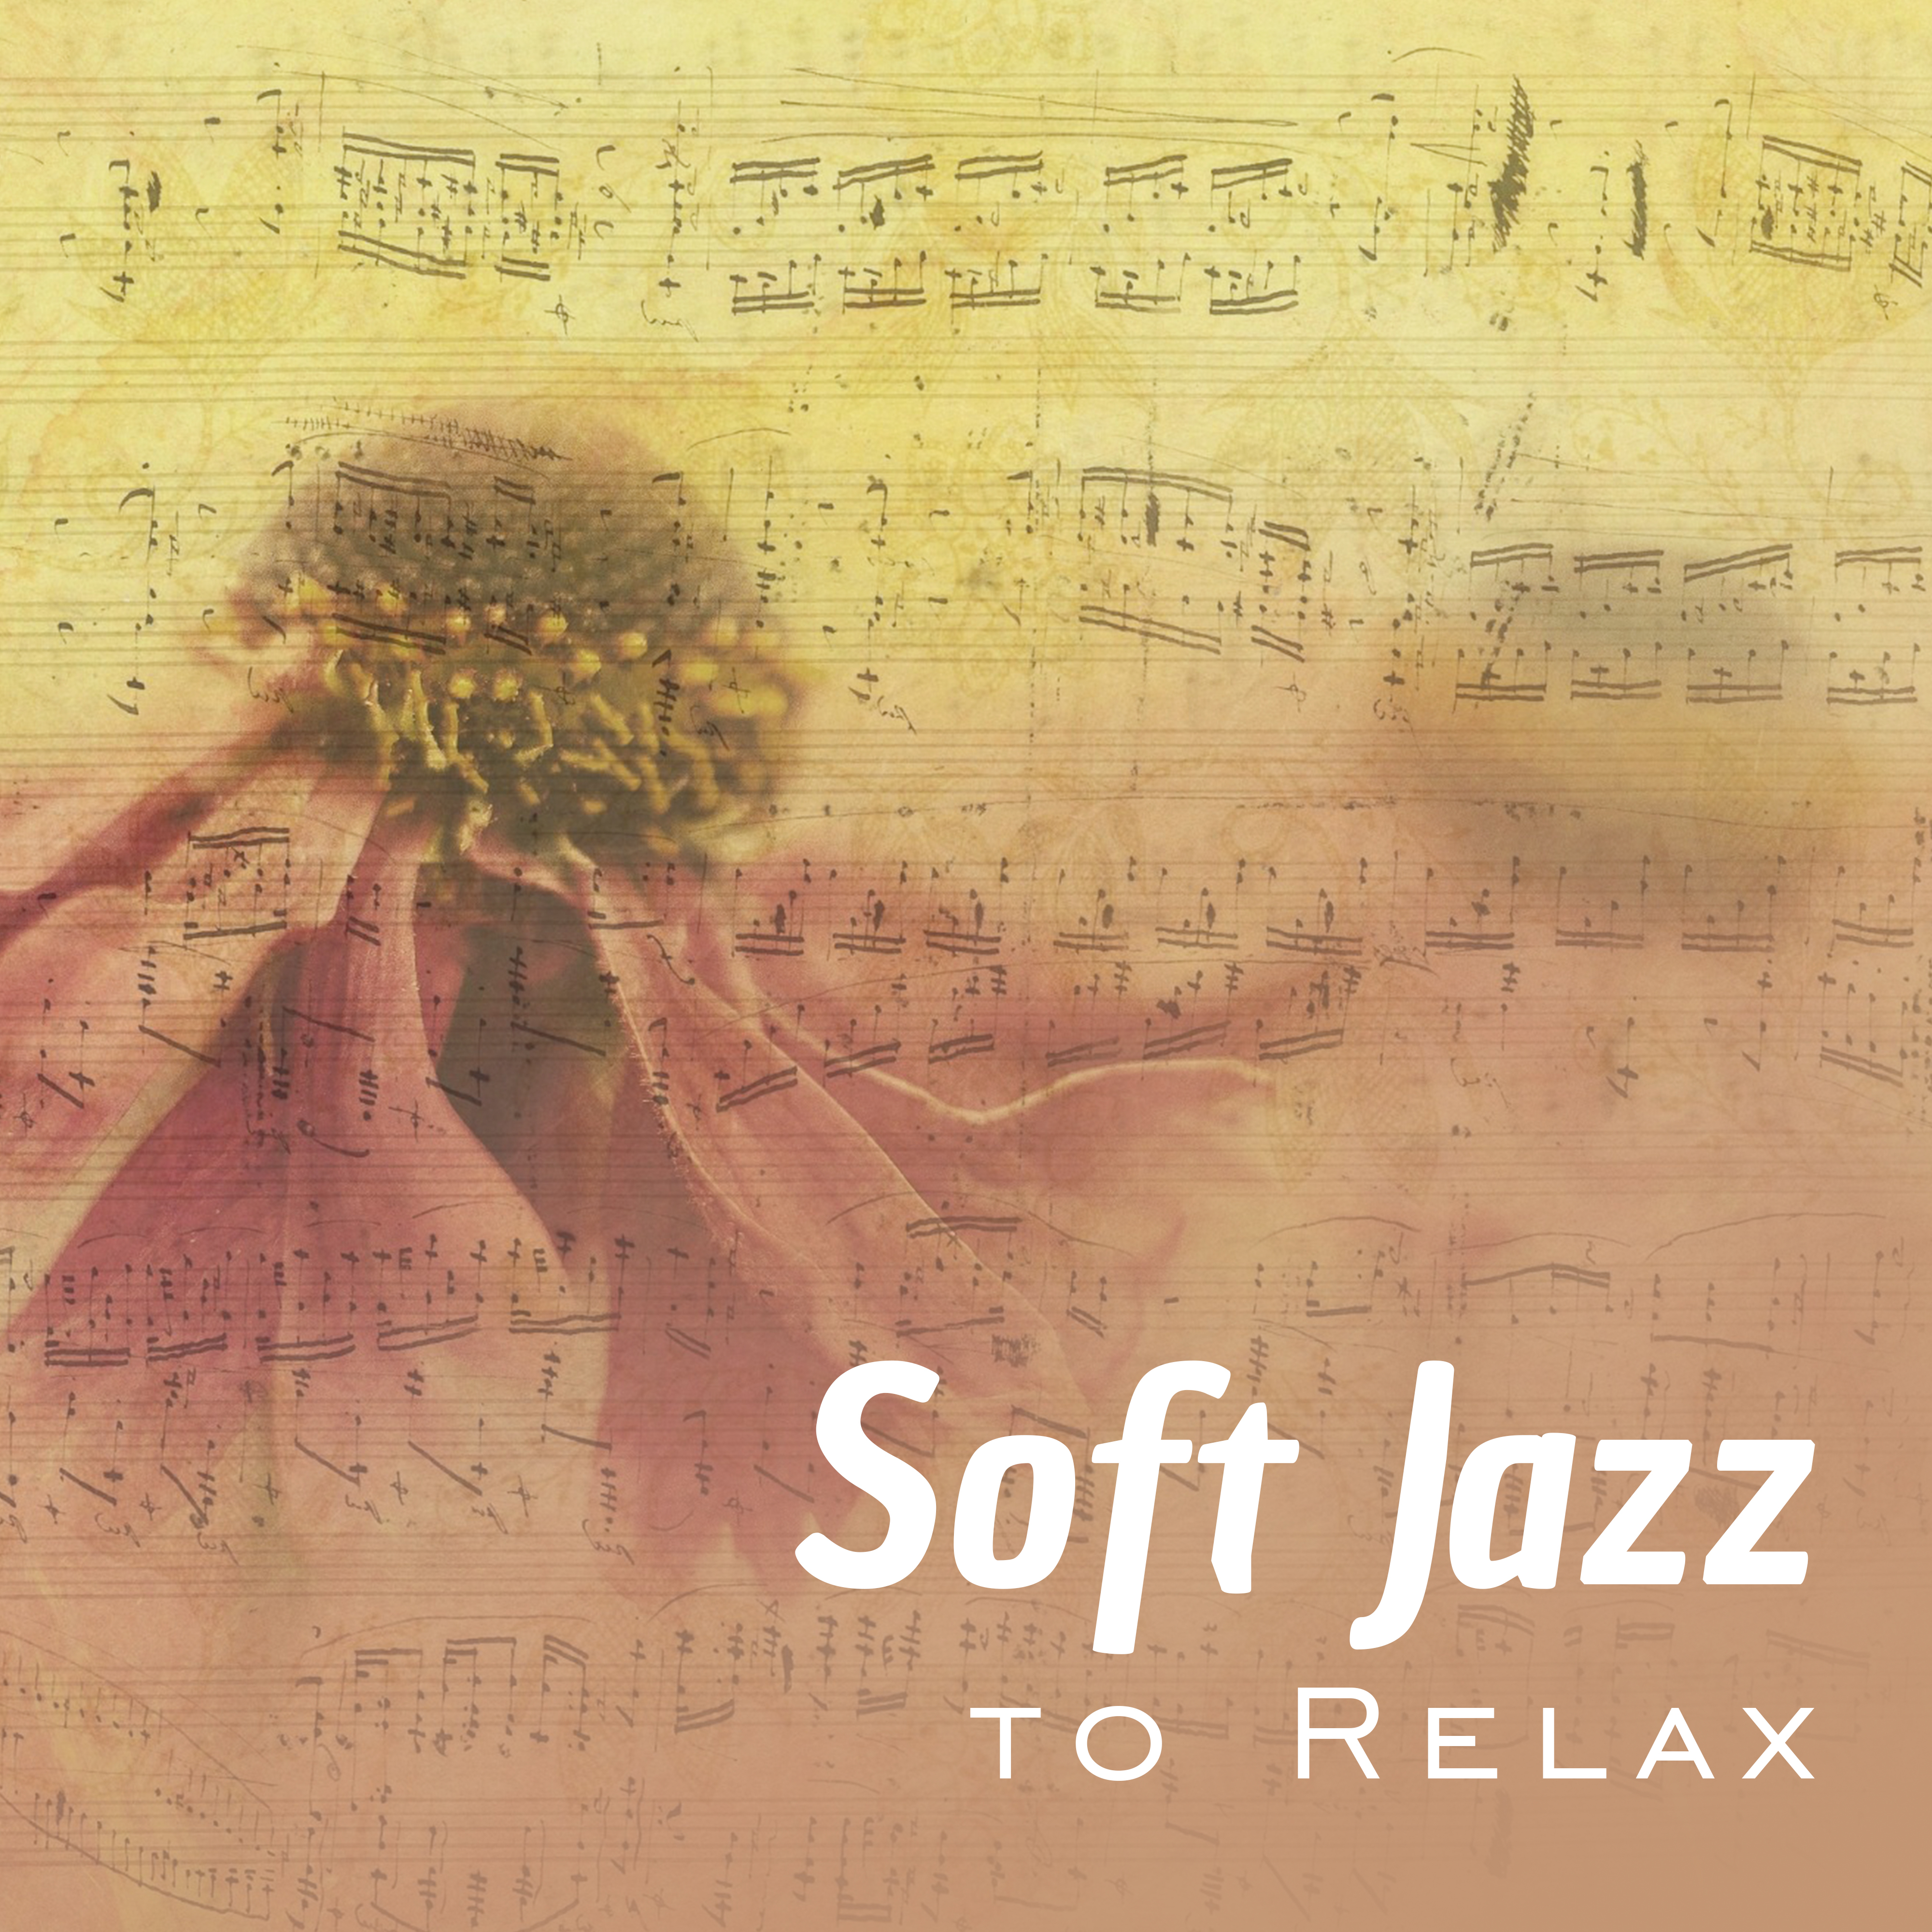 Soft Jazz to Relax – Evening Smooth Jazz, Music to Calm Down, Easy Listening, Best Background Music to Rest